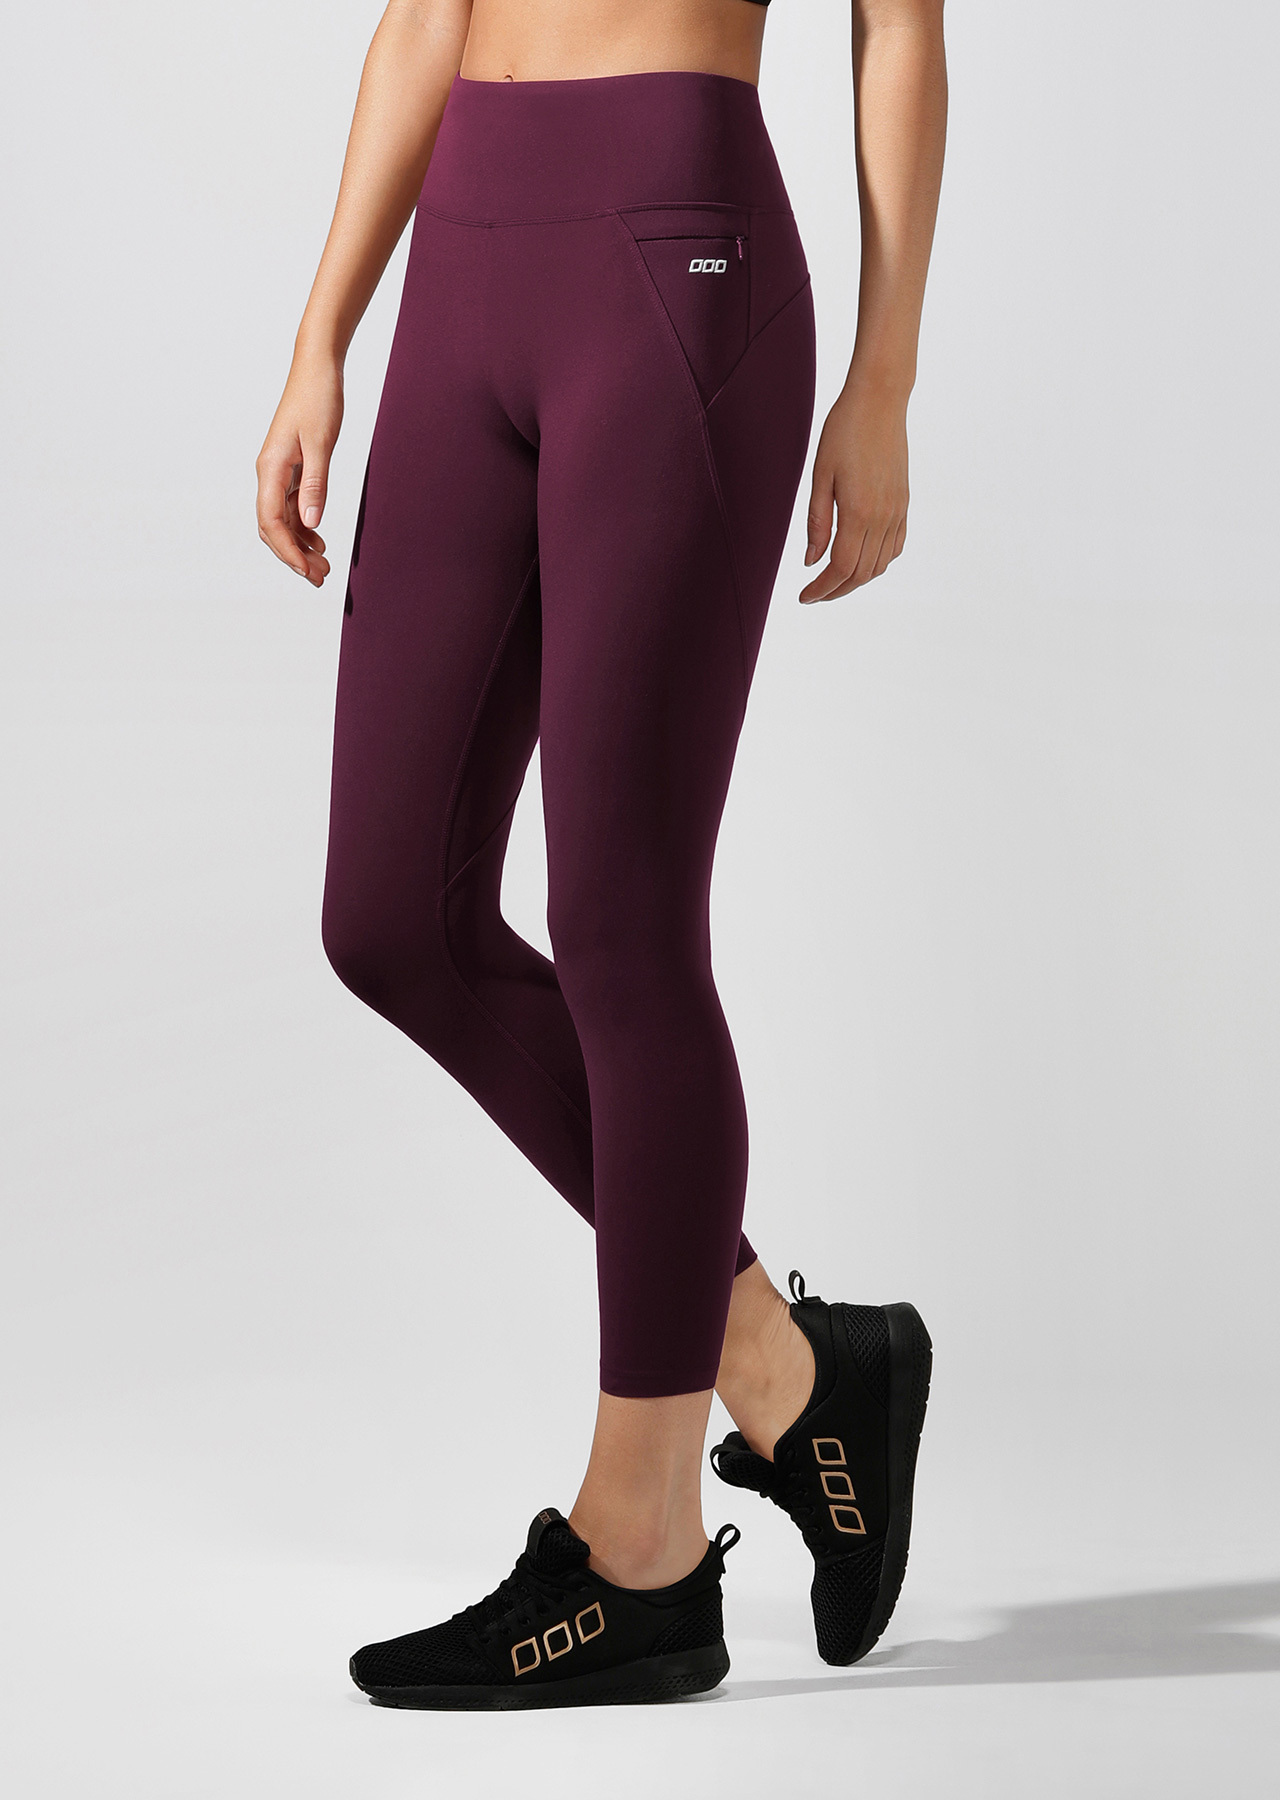 The Lorna Janes Full-Length Amy Leggings Are Selling Out - This Is